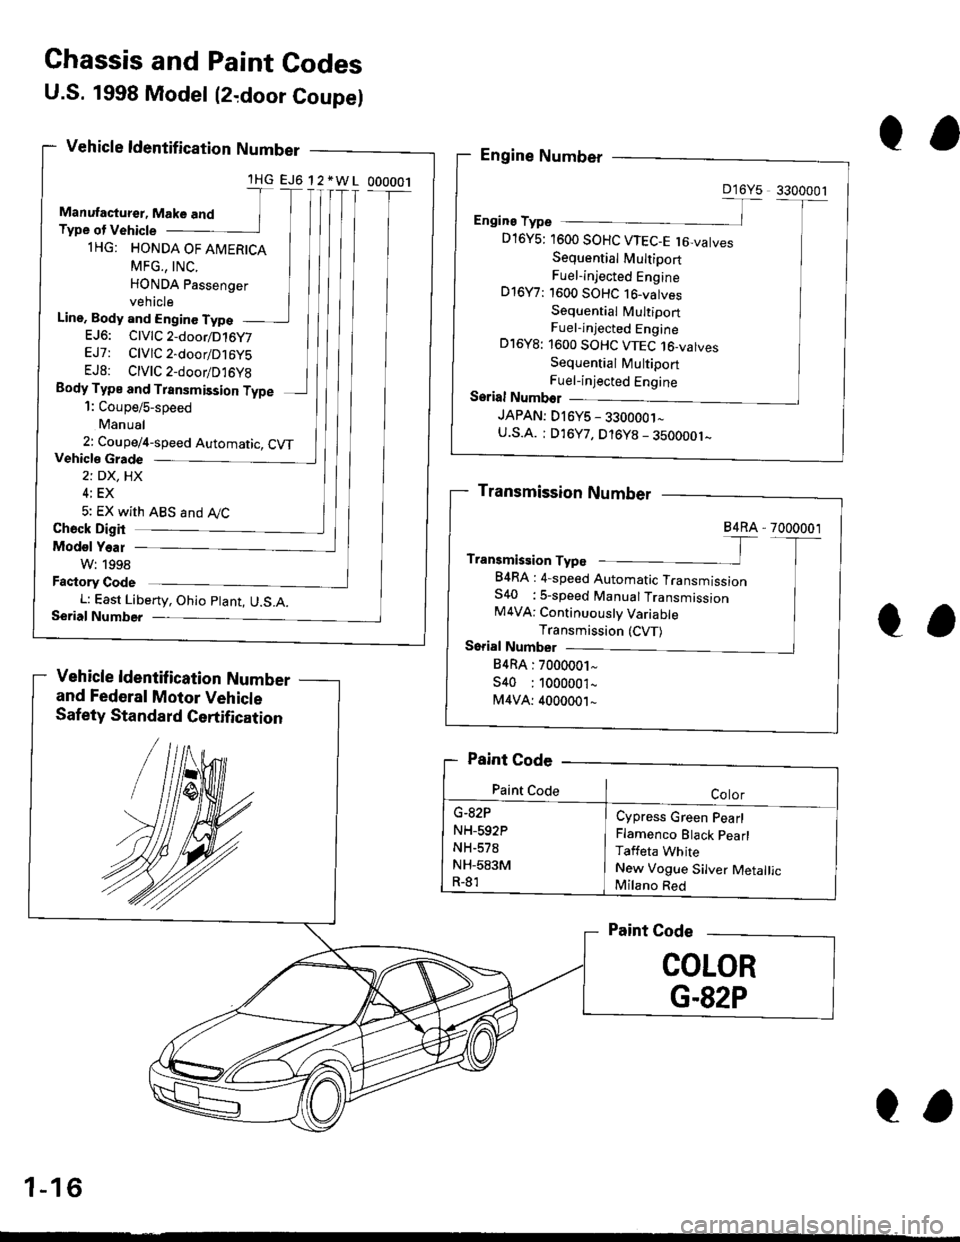 HONDA CIVIC 1998 6.G User Guide Ghassis and Paint Codes
U.S. 1998 Model (2,door Coupel
Vehicle ldentif ication Number
and Federal Motor Vehicle
Safety Standard Certification
lHG EJ6 12*WL 000001
Line, Body and Enginc TypeEJ6: ClVlC2